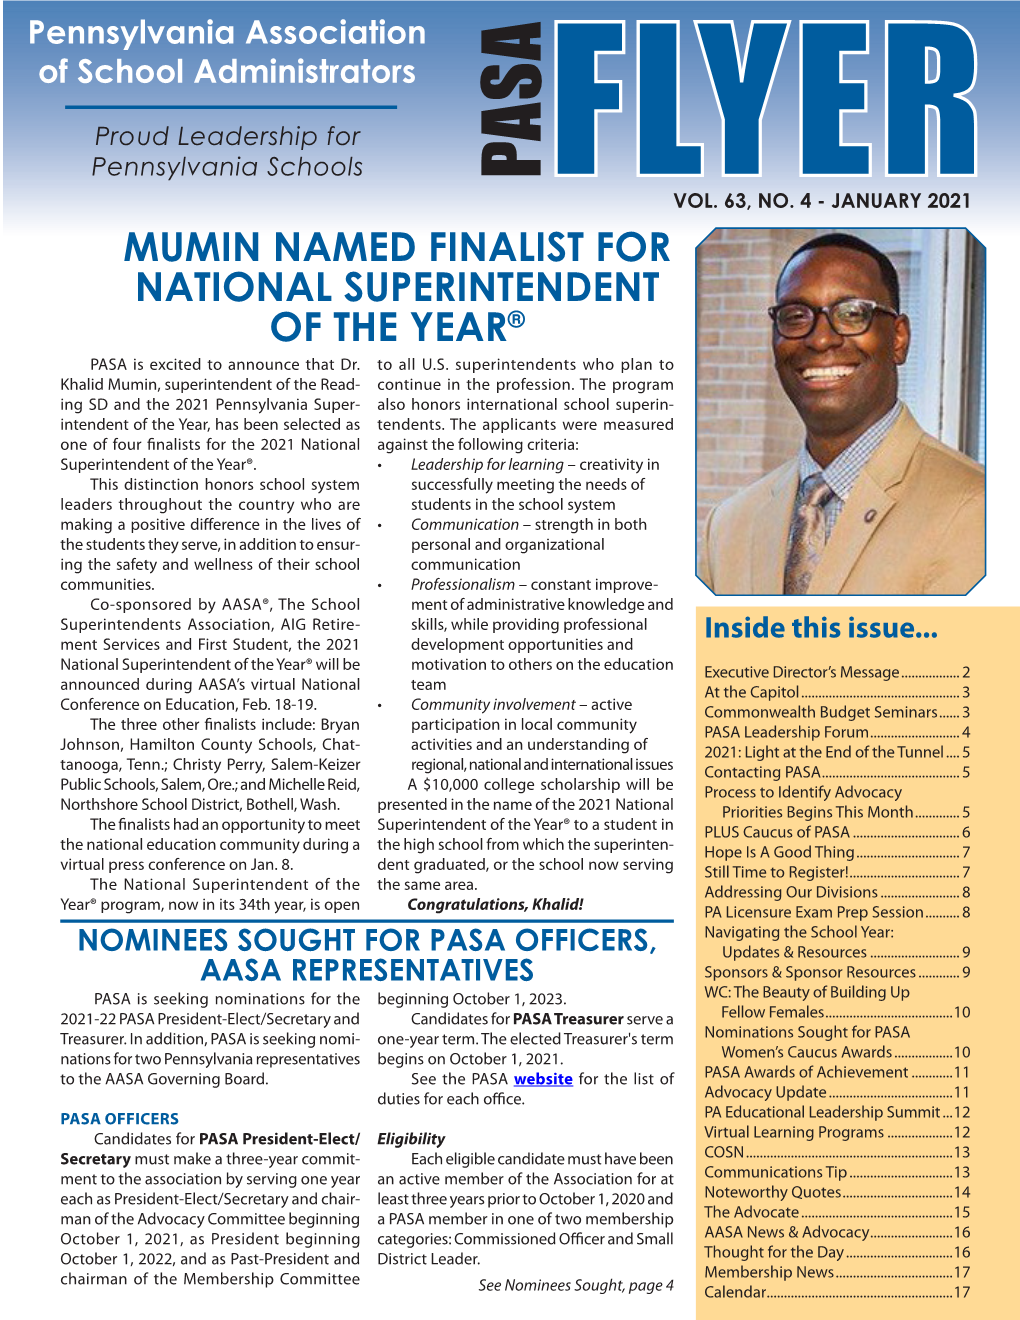 MUMIN NAMED FINALIST for NATIONAL SUPERINTENDENT of the YEAR® PASA Is Excited to Announce That Dr